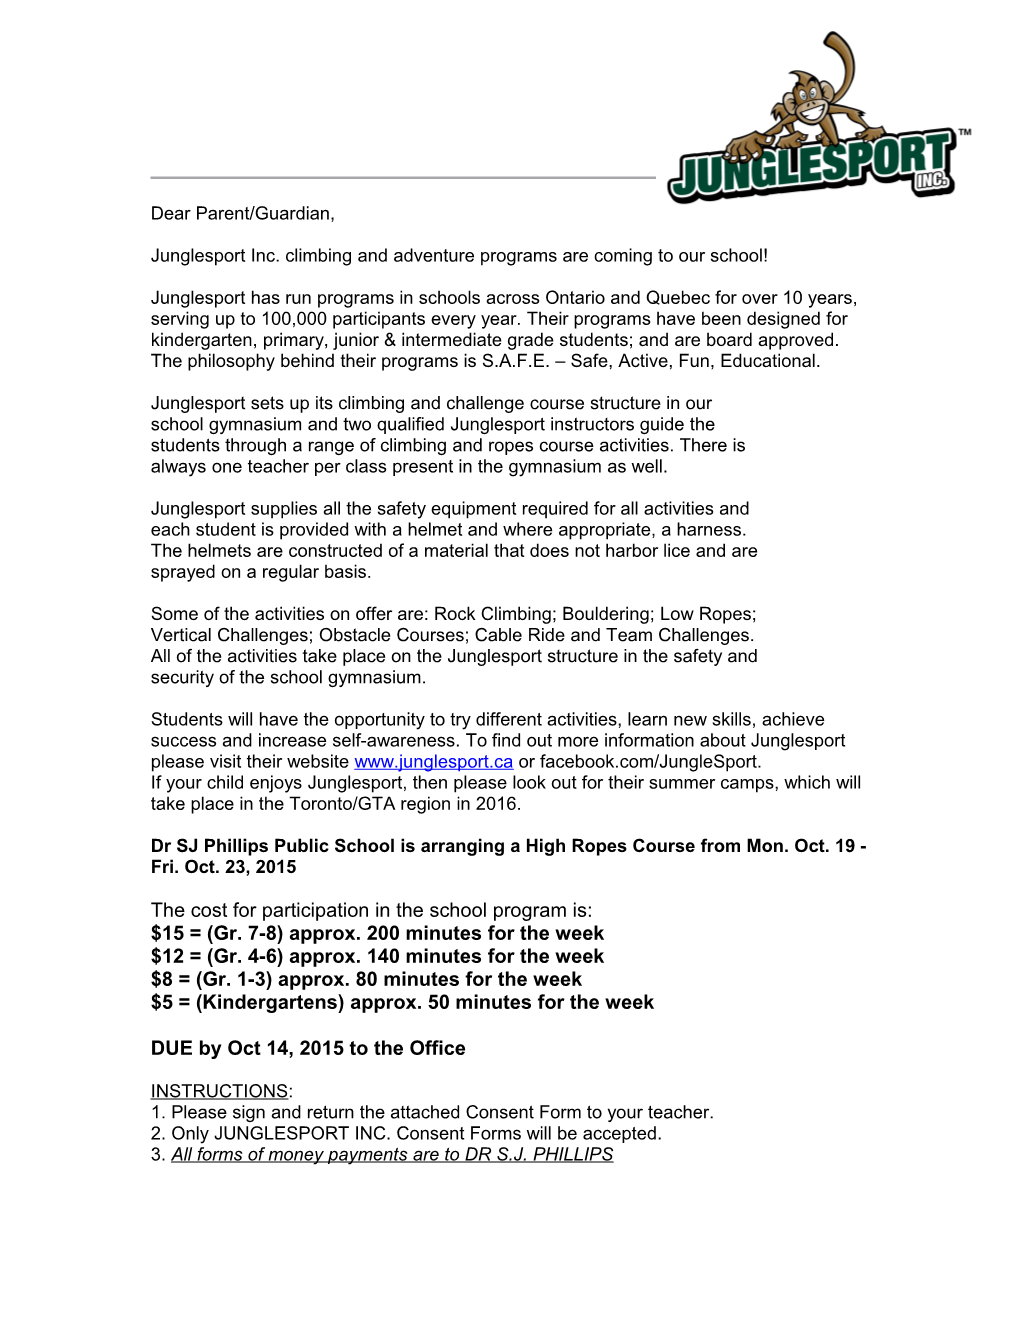 Junglesport Inc. Climbing and Adventure Programs Are Coming to Our School!